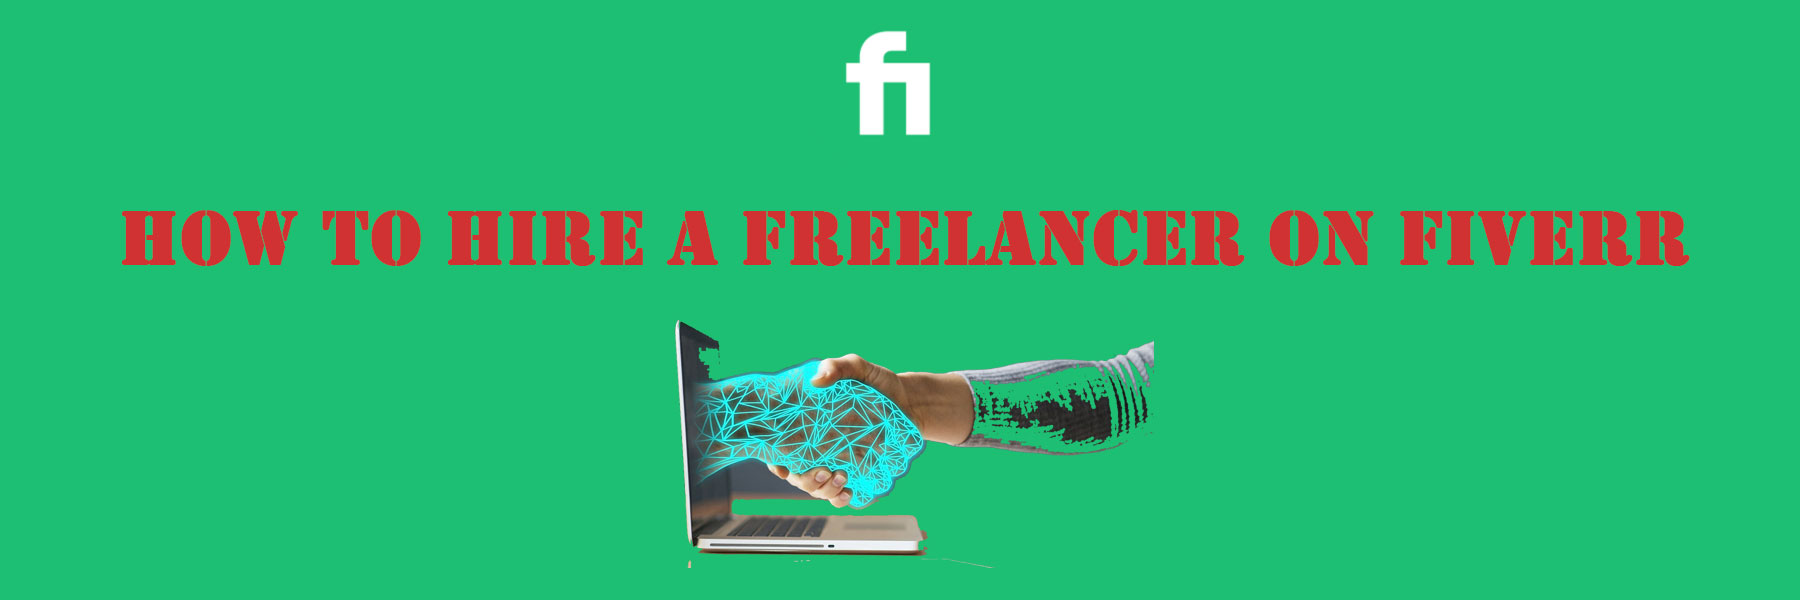 How to Hire a Freelancer on Fiverr